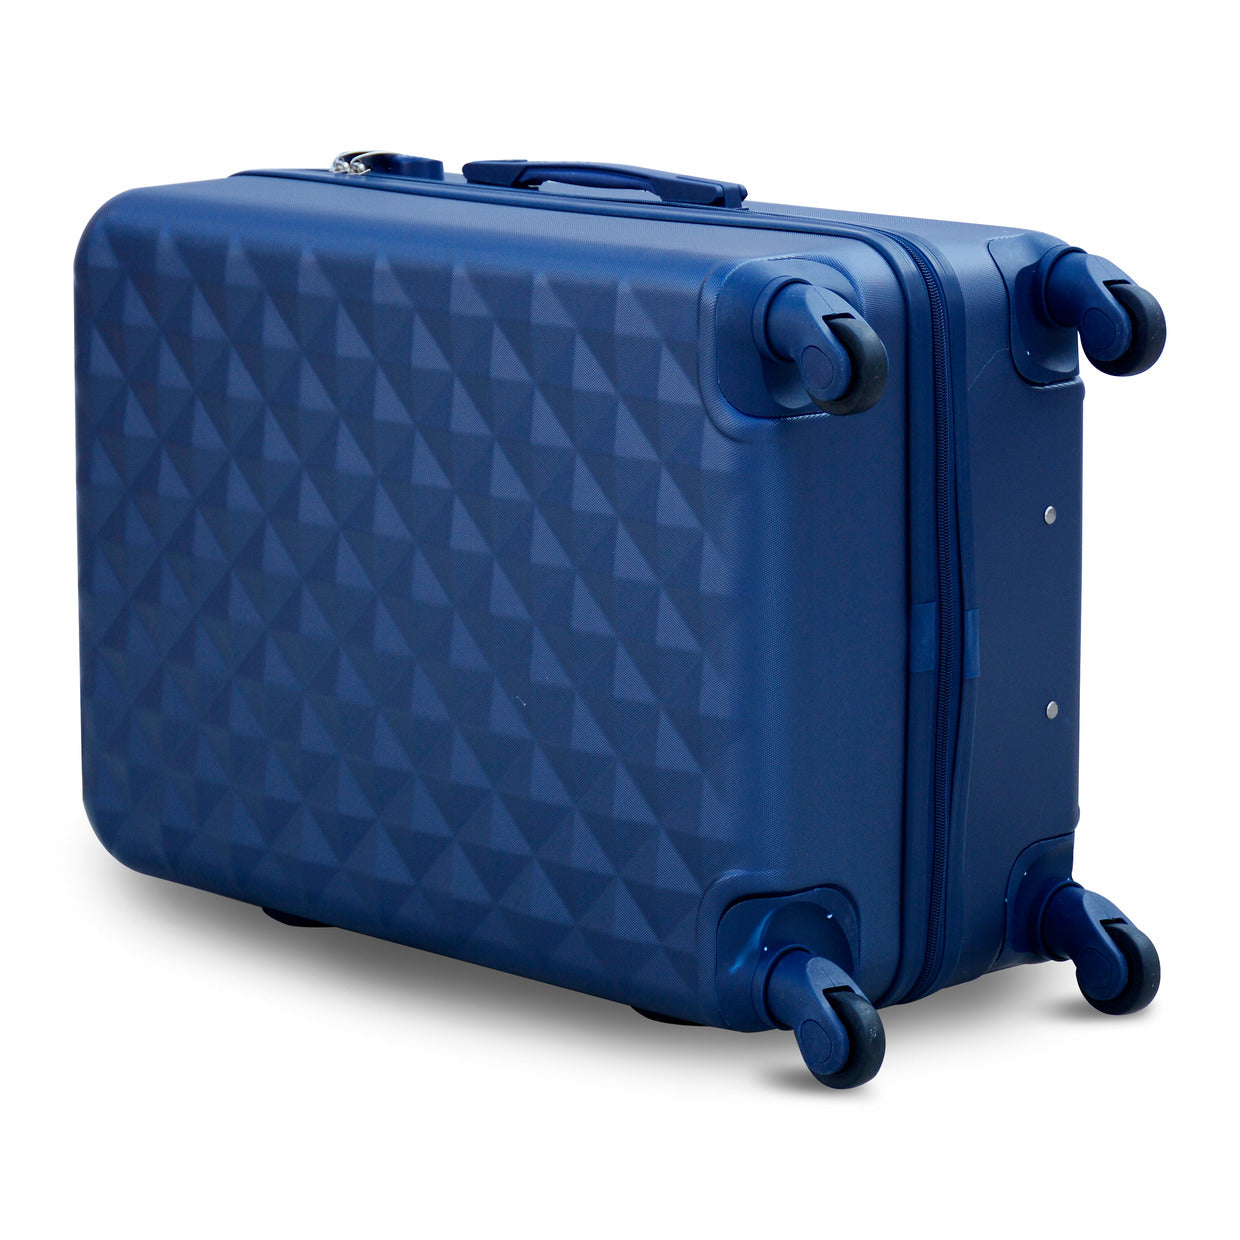 20" Blue Colour Diamond Cut ABS Luggage Lightweight Hard Case Carry On Spinner Wheel Baggage